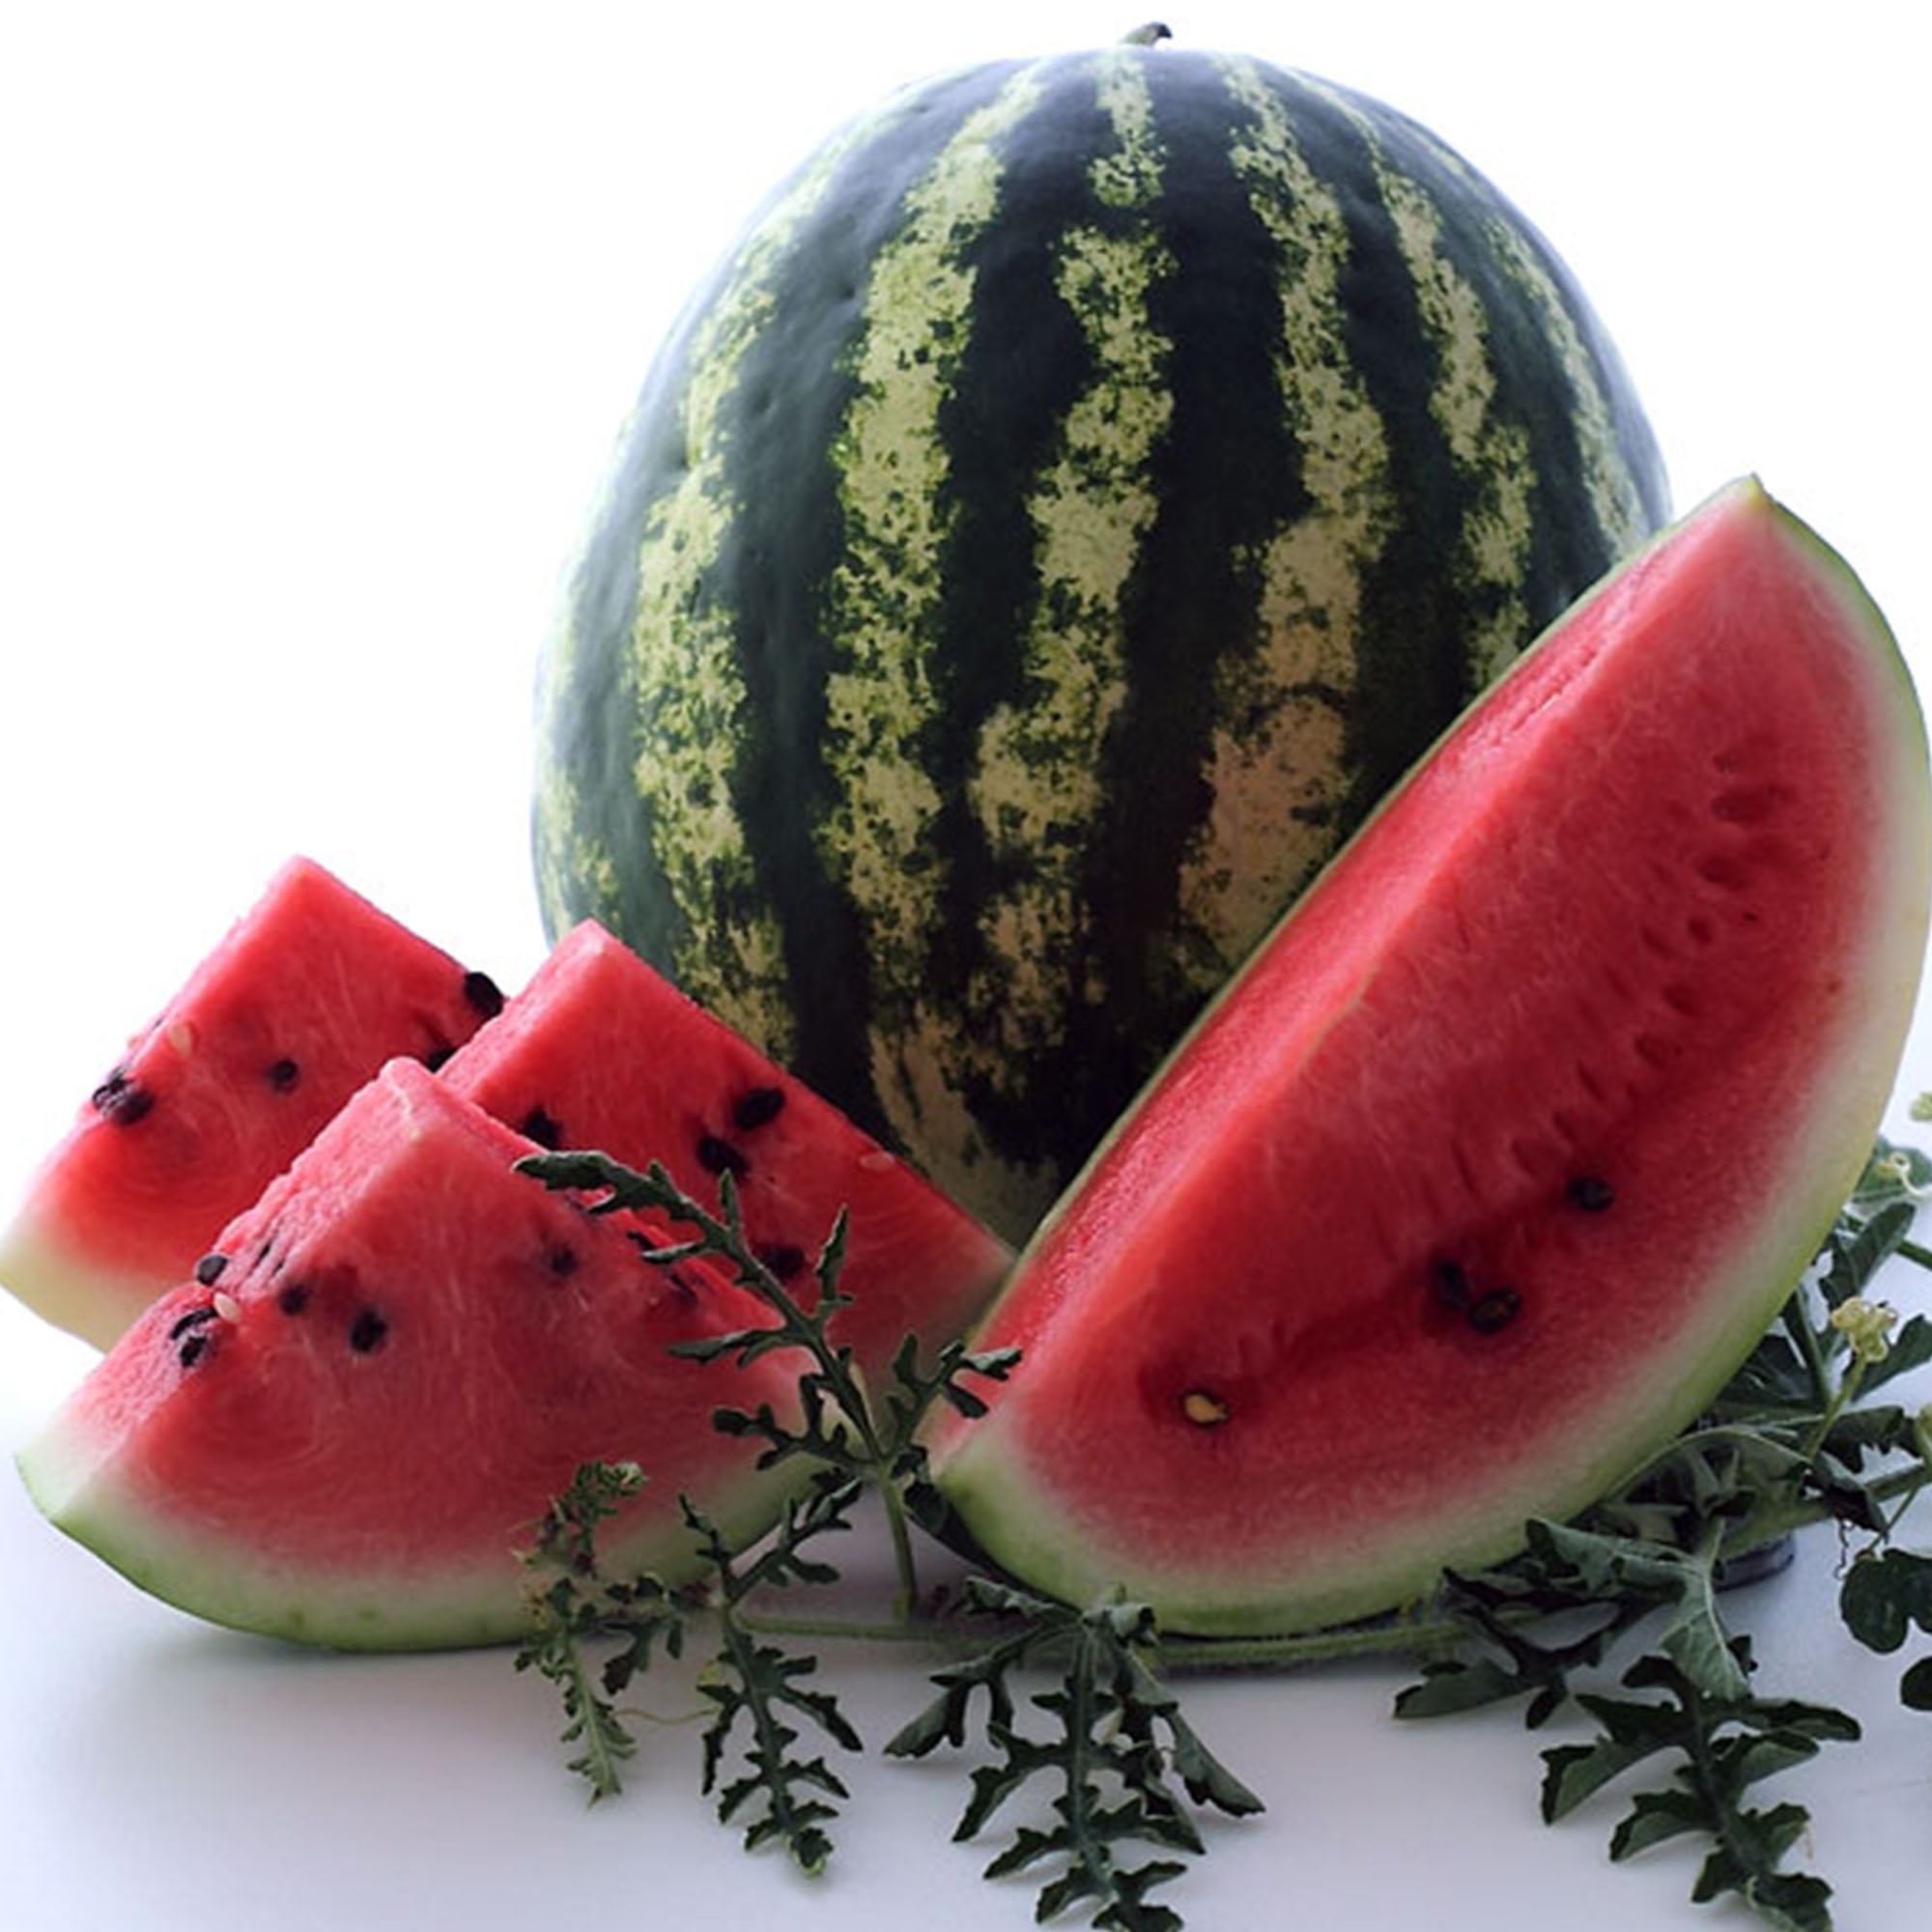 All Sweet Watermelon Seeds 50 SEEDS NON-GMO